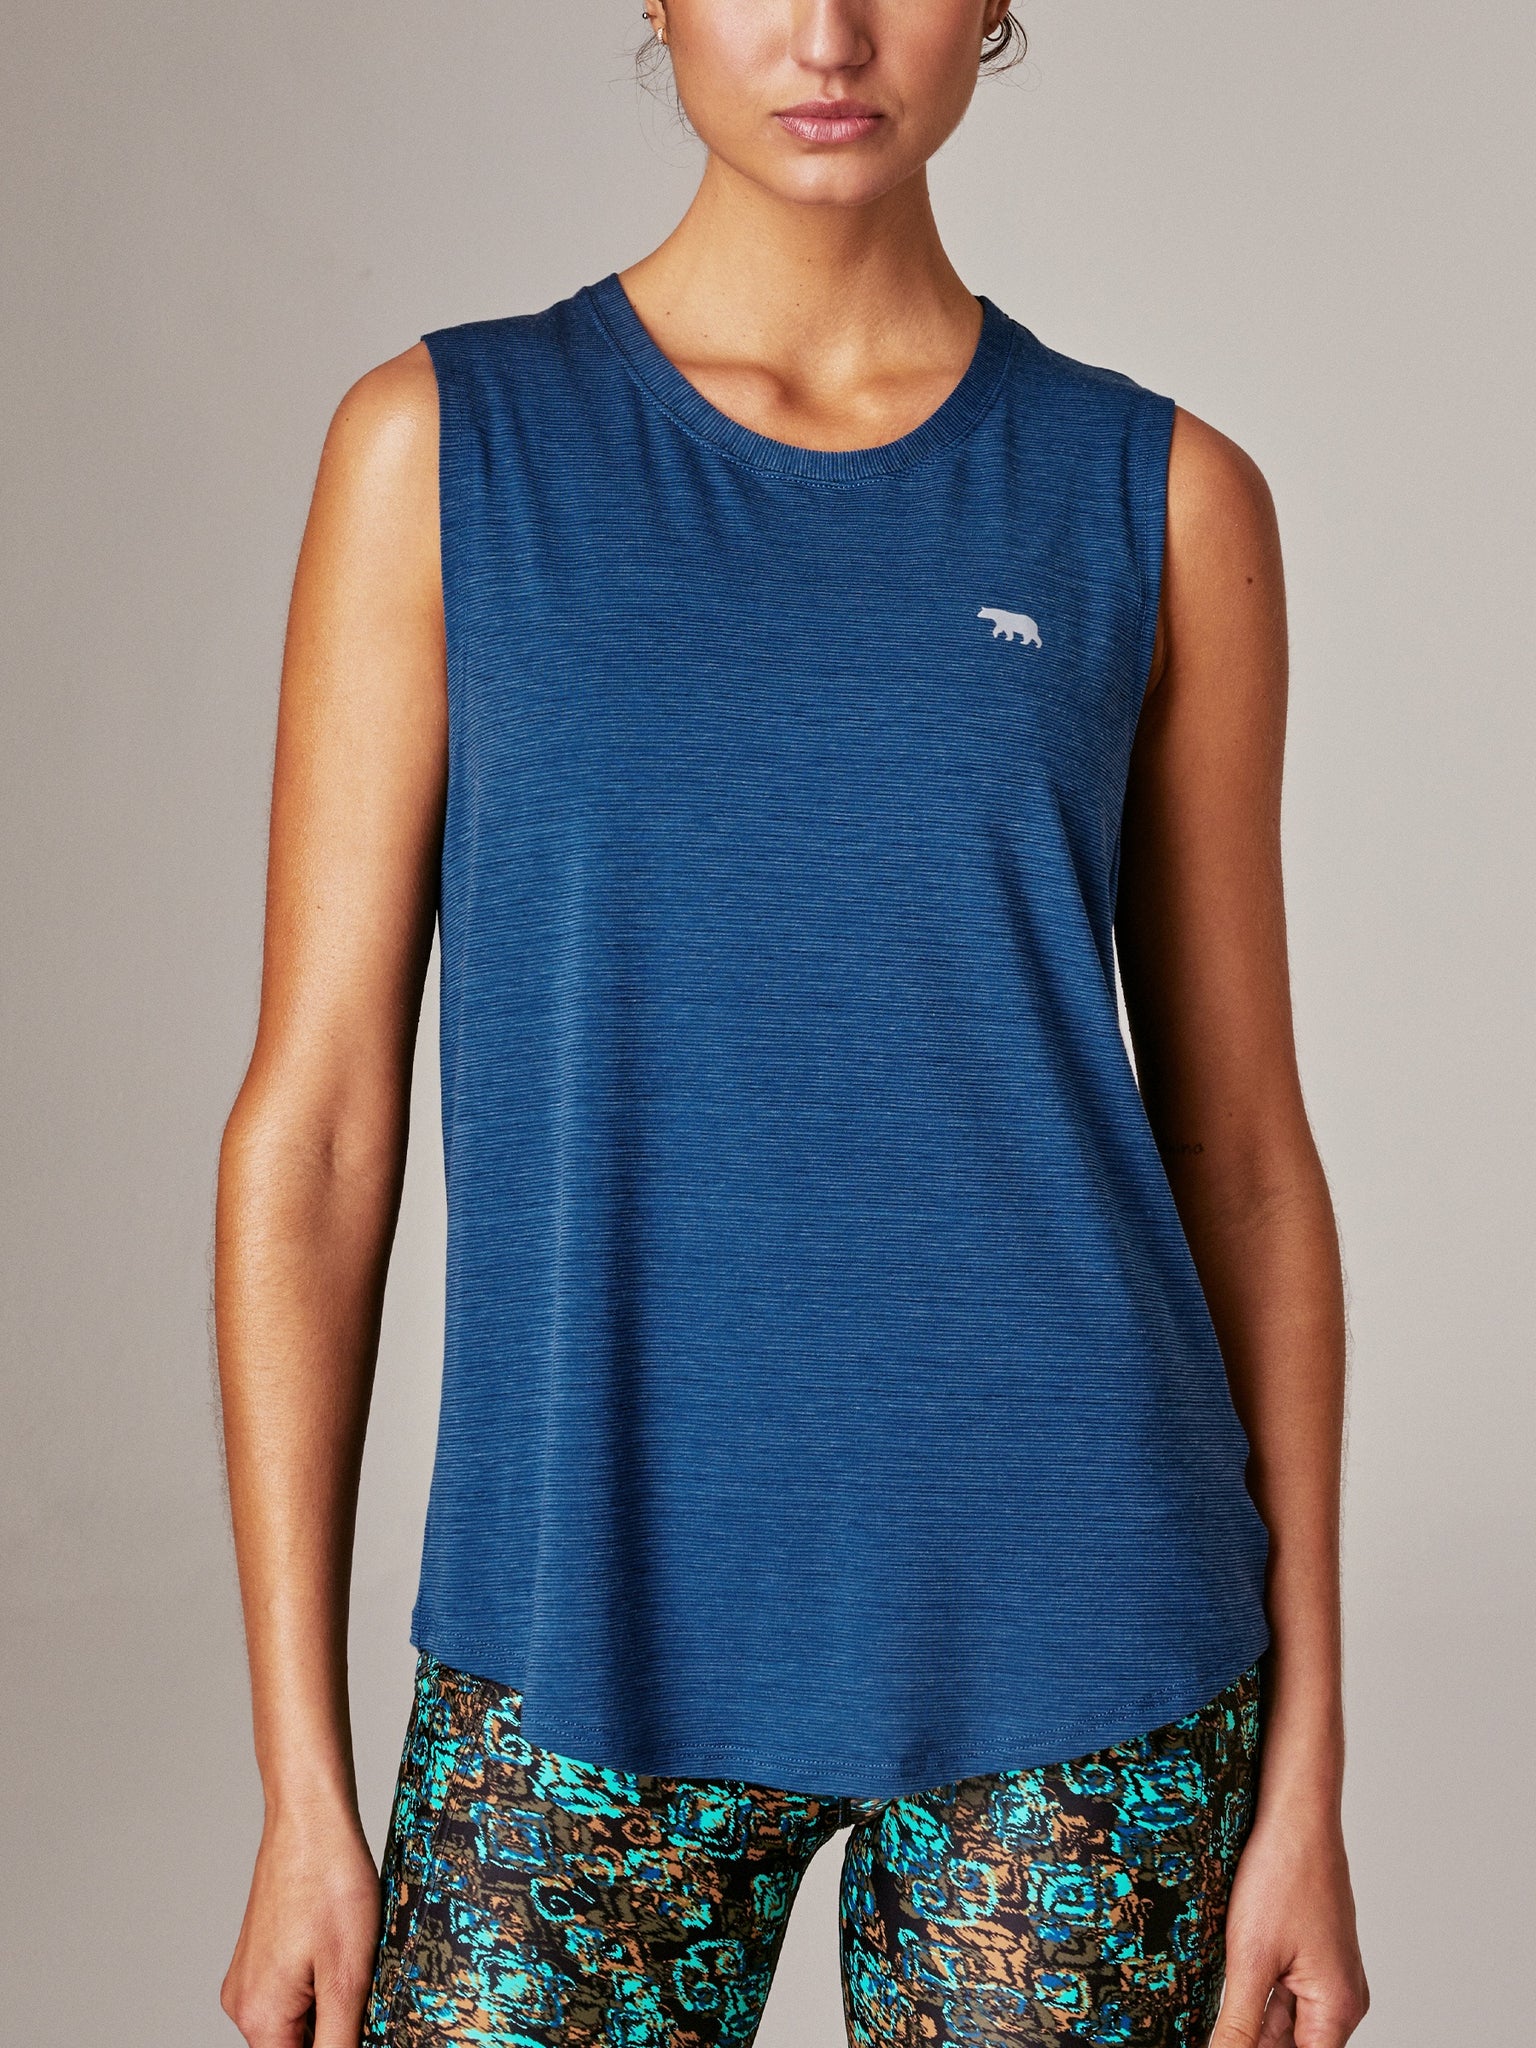 Barely Distressed Muscle Tank - Peacock